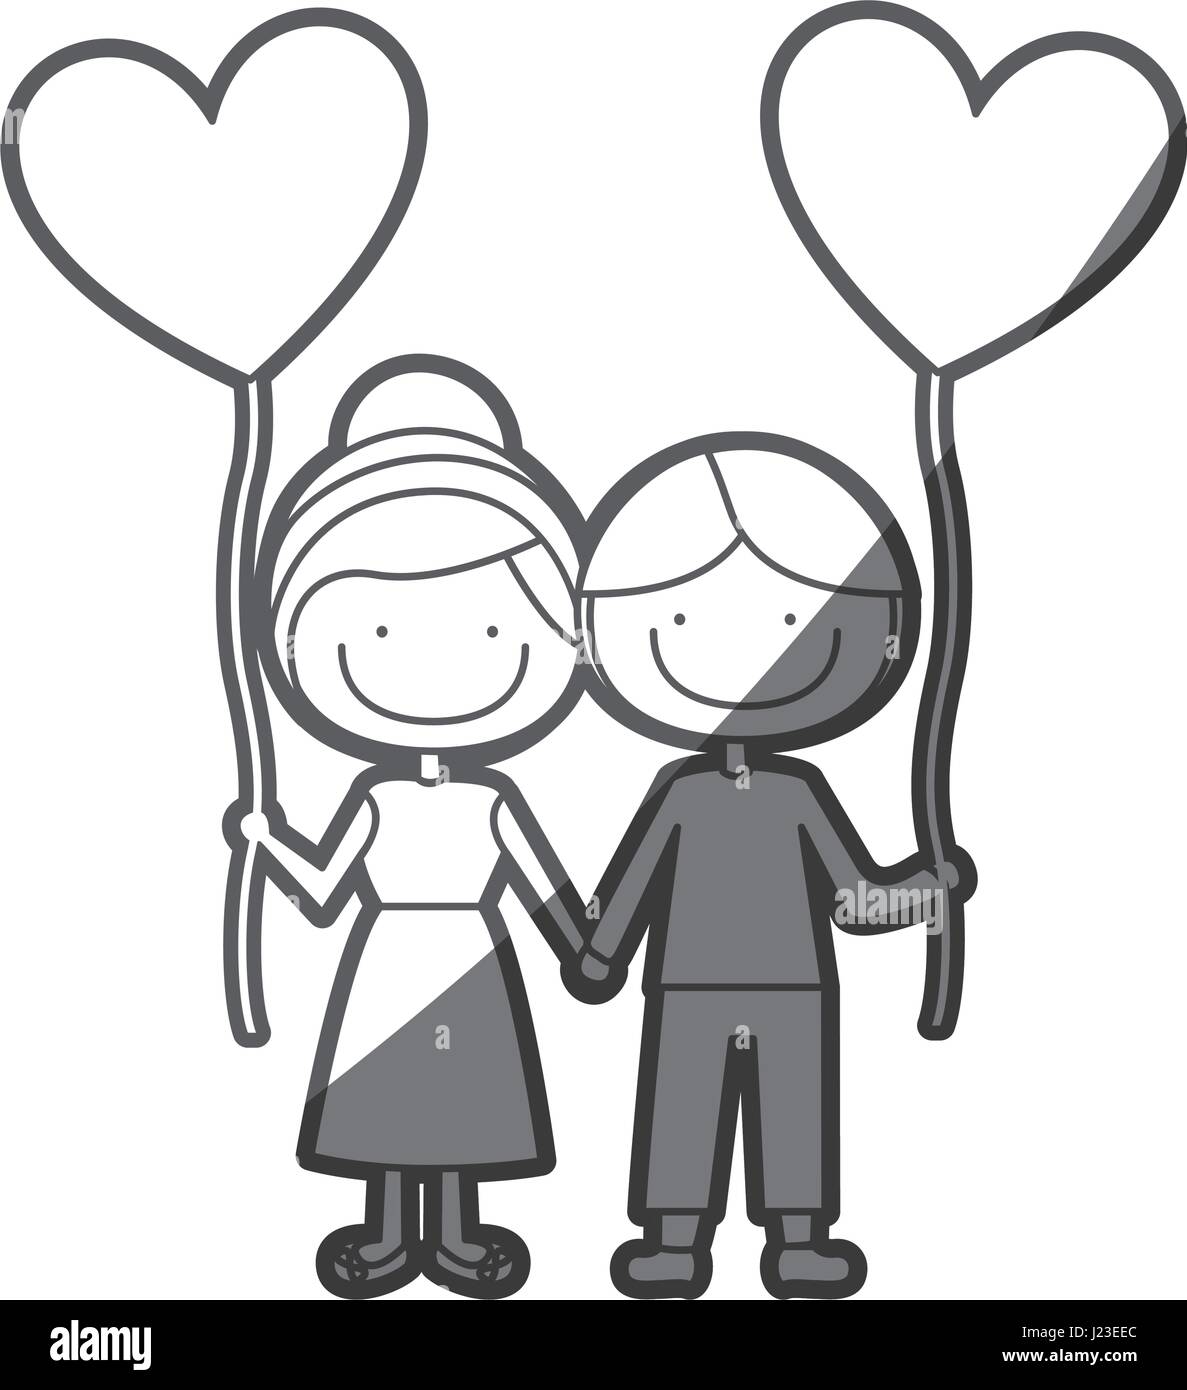 Grayscale Silhouette Of Caricature Of Boy And Girl With Balloon In Shape Of Heart Stock Vector Image Art Alamy